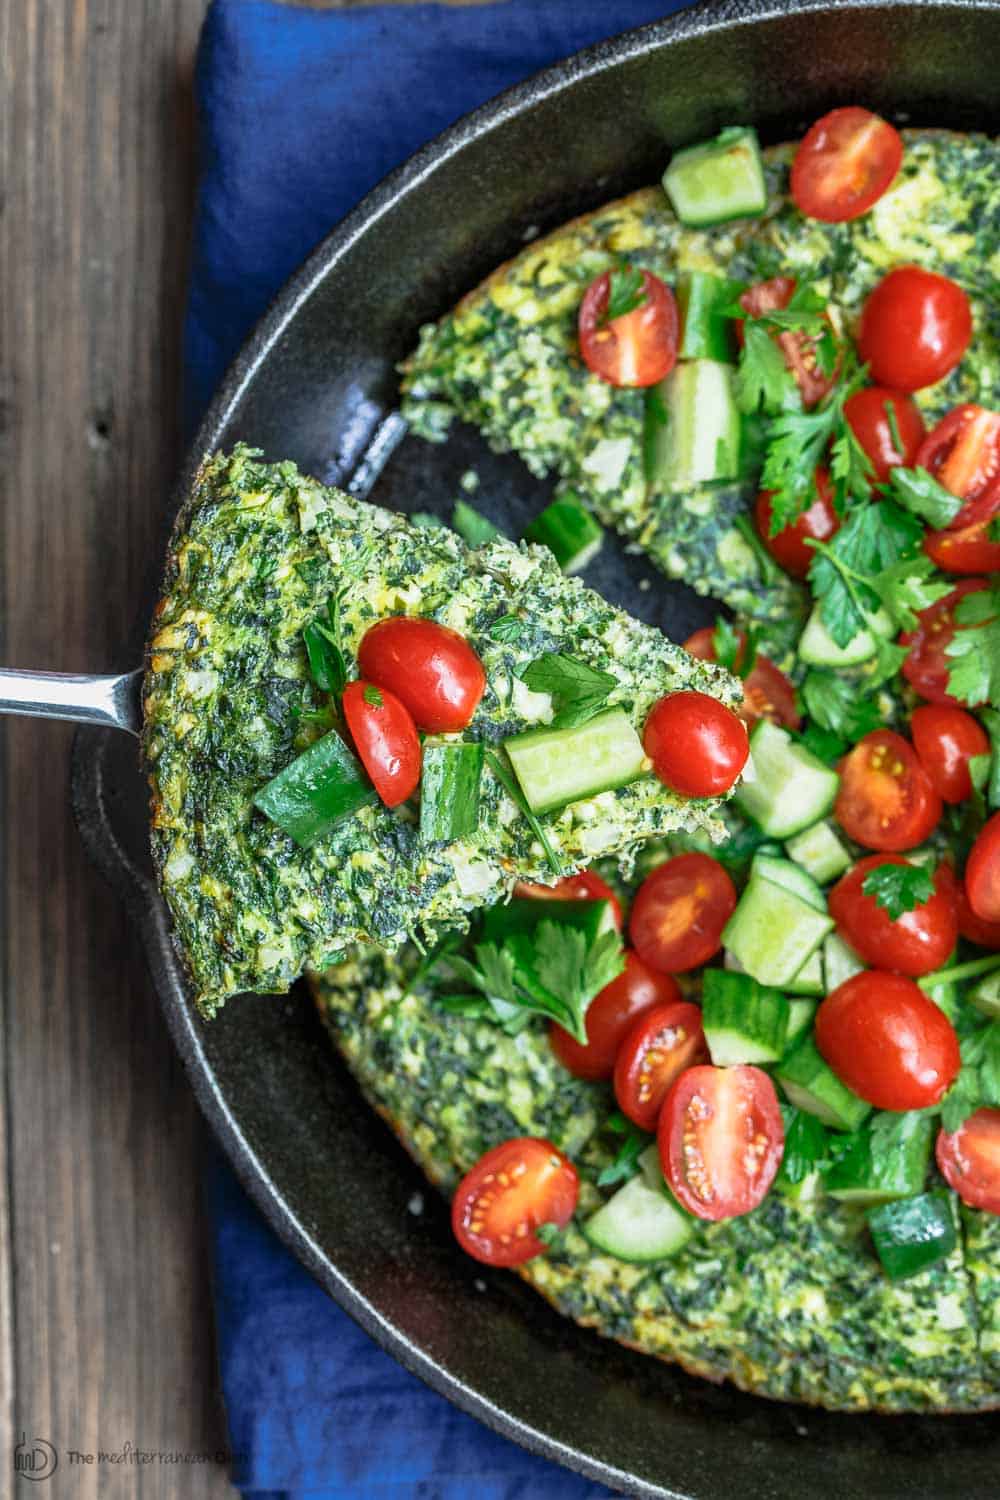 Feta and Spinach Frittata Recipe | The Mediterranean Dish. Easy, flavor-packed fritta with feta, spinach, and parsley. The perfect breakfast or weeknight dinner in just 20 minutes. From TheMediterraneanDish.com #frittata #eggs #mediterraenandiet #mediterraenanfood #italianfood #spinach #feta #healthyrecipes #easyrecipes